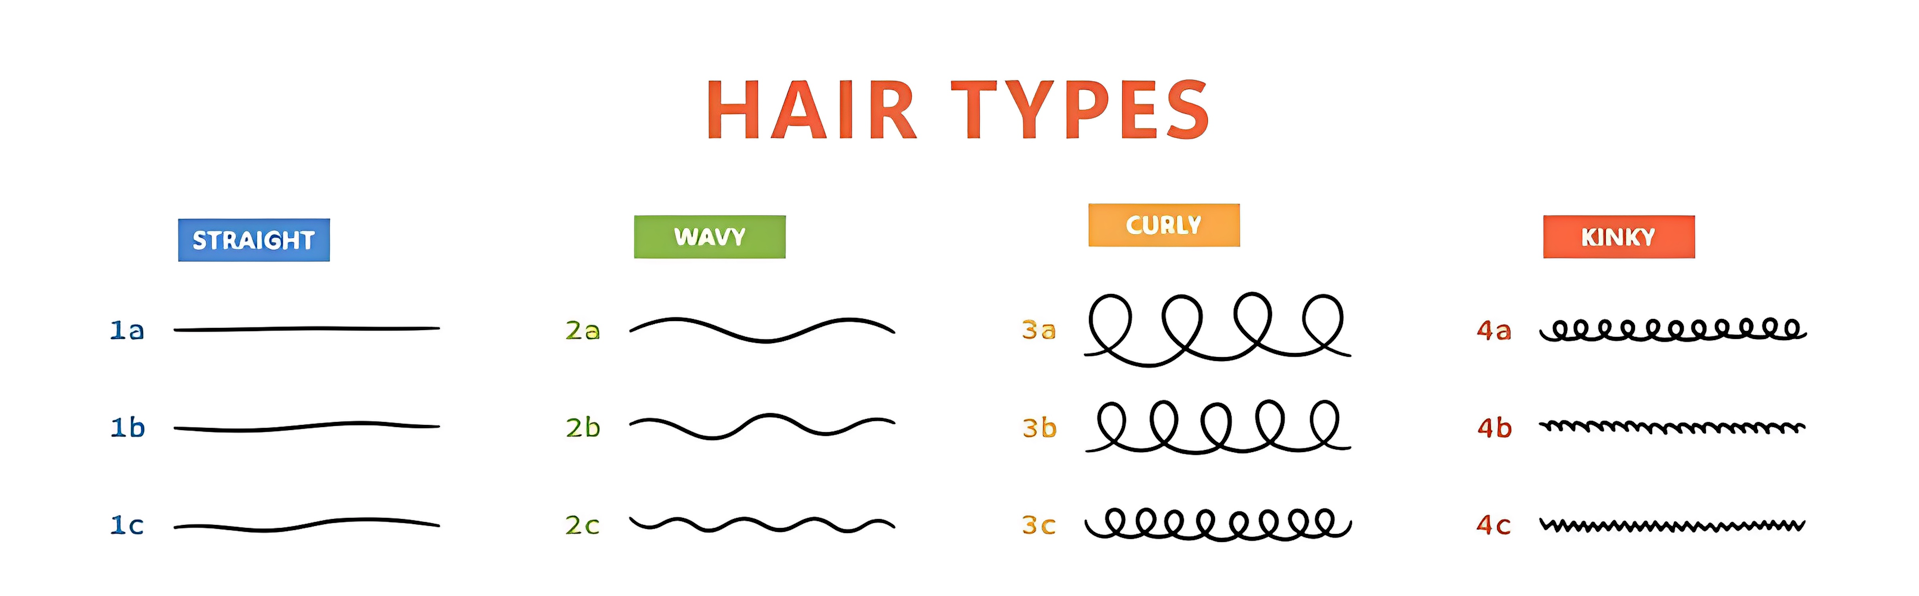 Infographic illustrating different hair types, captioned with 'What is my hair type?' from 1A to 4C.